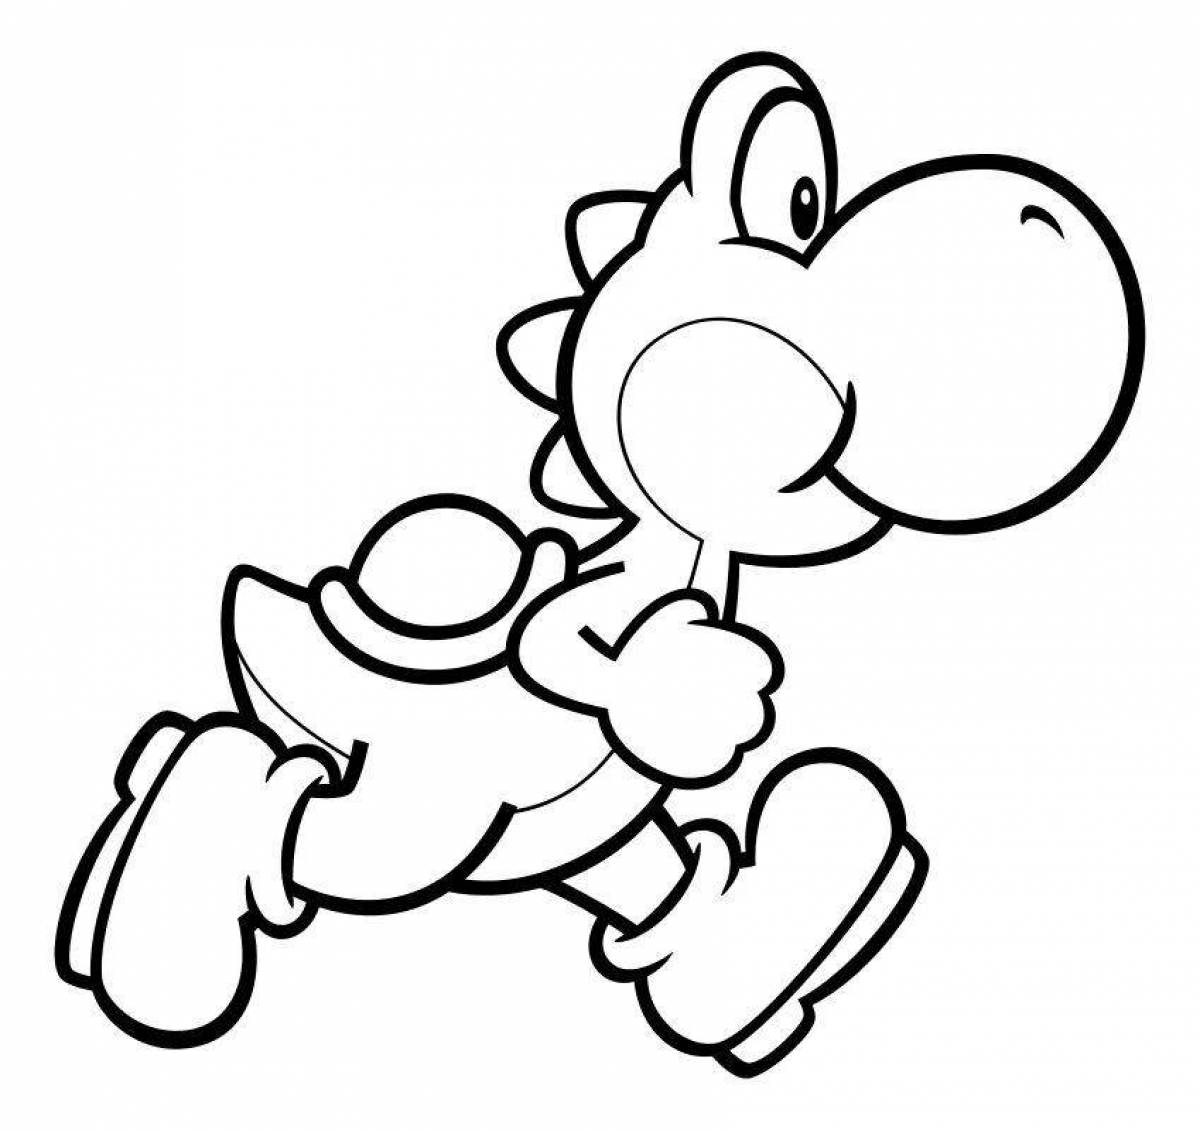 Yoshi's awesome coloring book